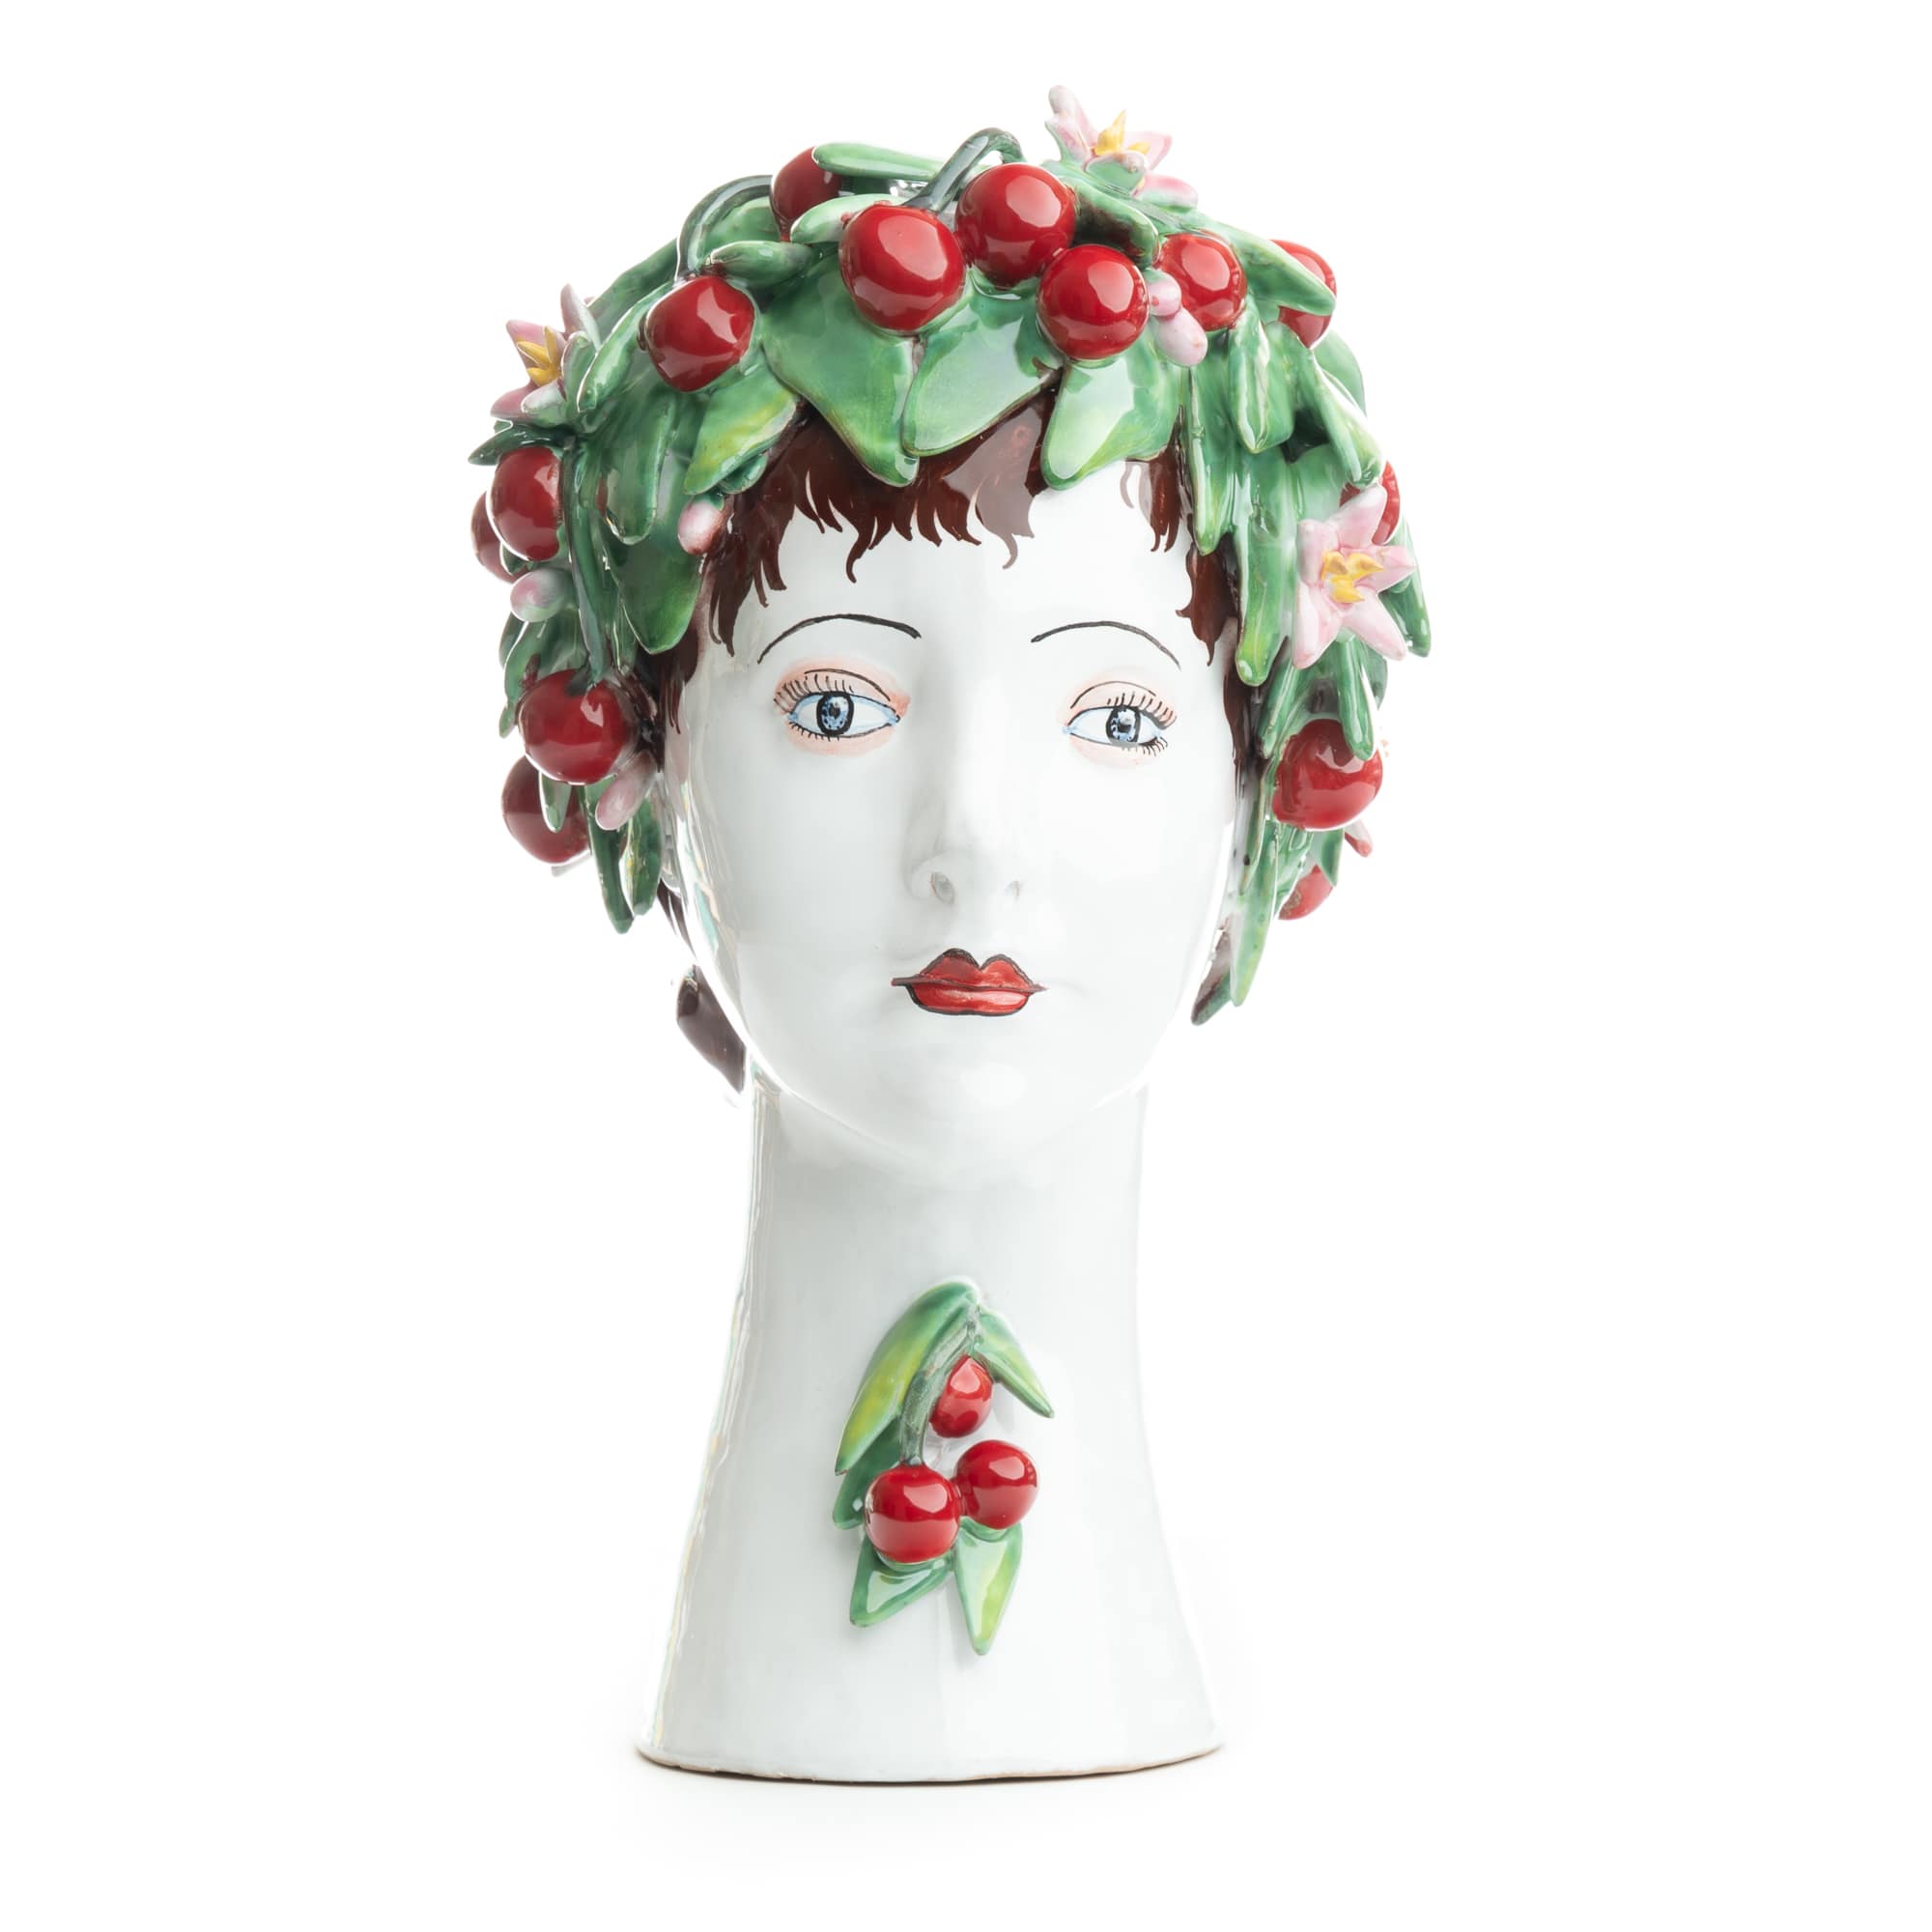 Ceramiche D'arte Dolfi Sculpture with Cherries, ceramics, pottery, italian design, majolica, handmade, handcrafted, handpainted, home decor, kitchen art, home goods, deruta, majolica, Artisan, treasures, traditional art, modern art, gift ideas, style, SF, shop small business, artists, shop online, landmark store, legacy, one of a kind, limited edition, gift guide, gift shop, retail shop, decorations, shopping, italy, home staging, home decorating, home interiors